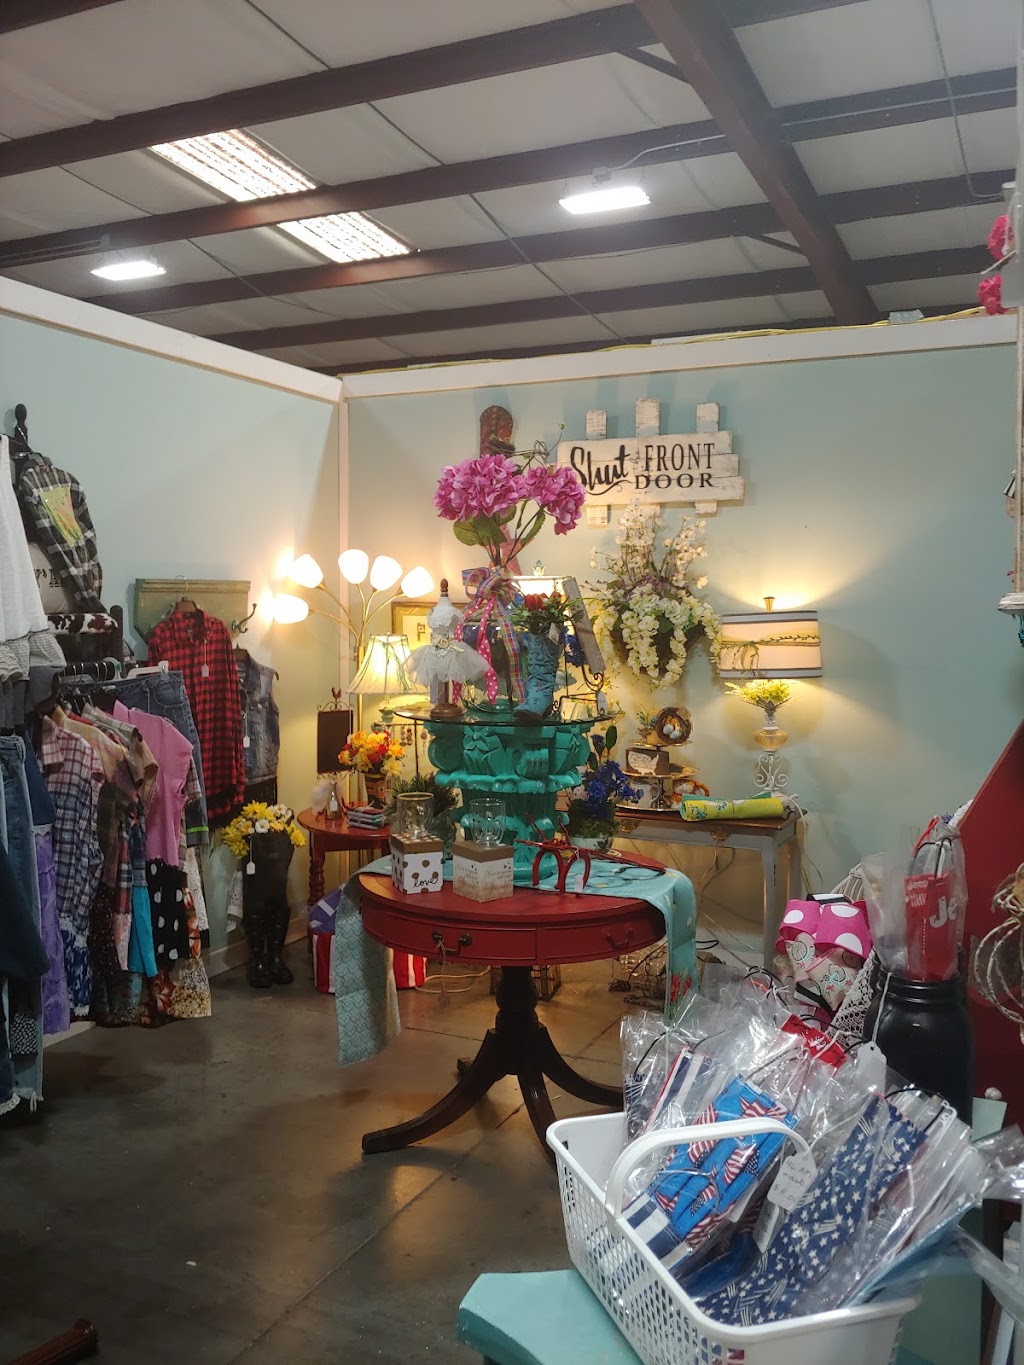 Stokesdale Marketplace | 341 Ram Loop Drive, Stokesdale, NC 27357, USA | Phone: (336) 949-9269